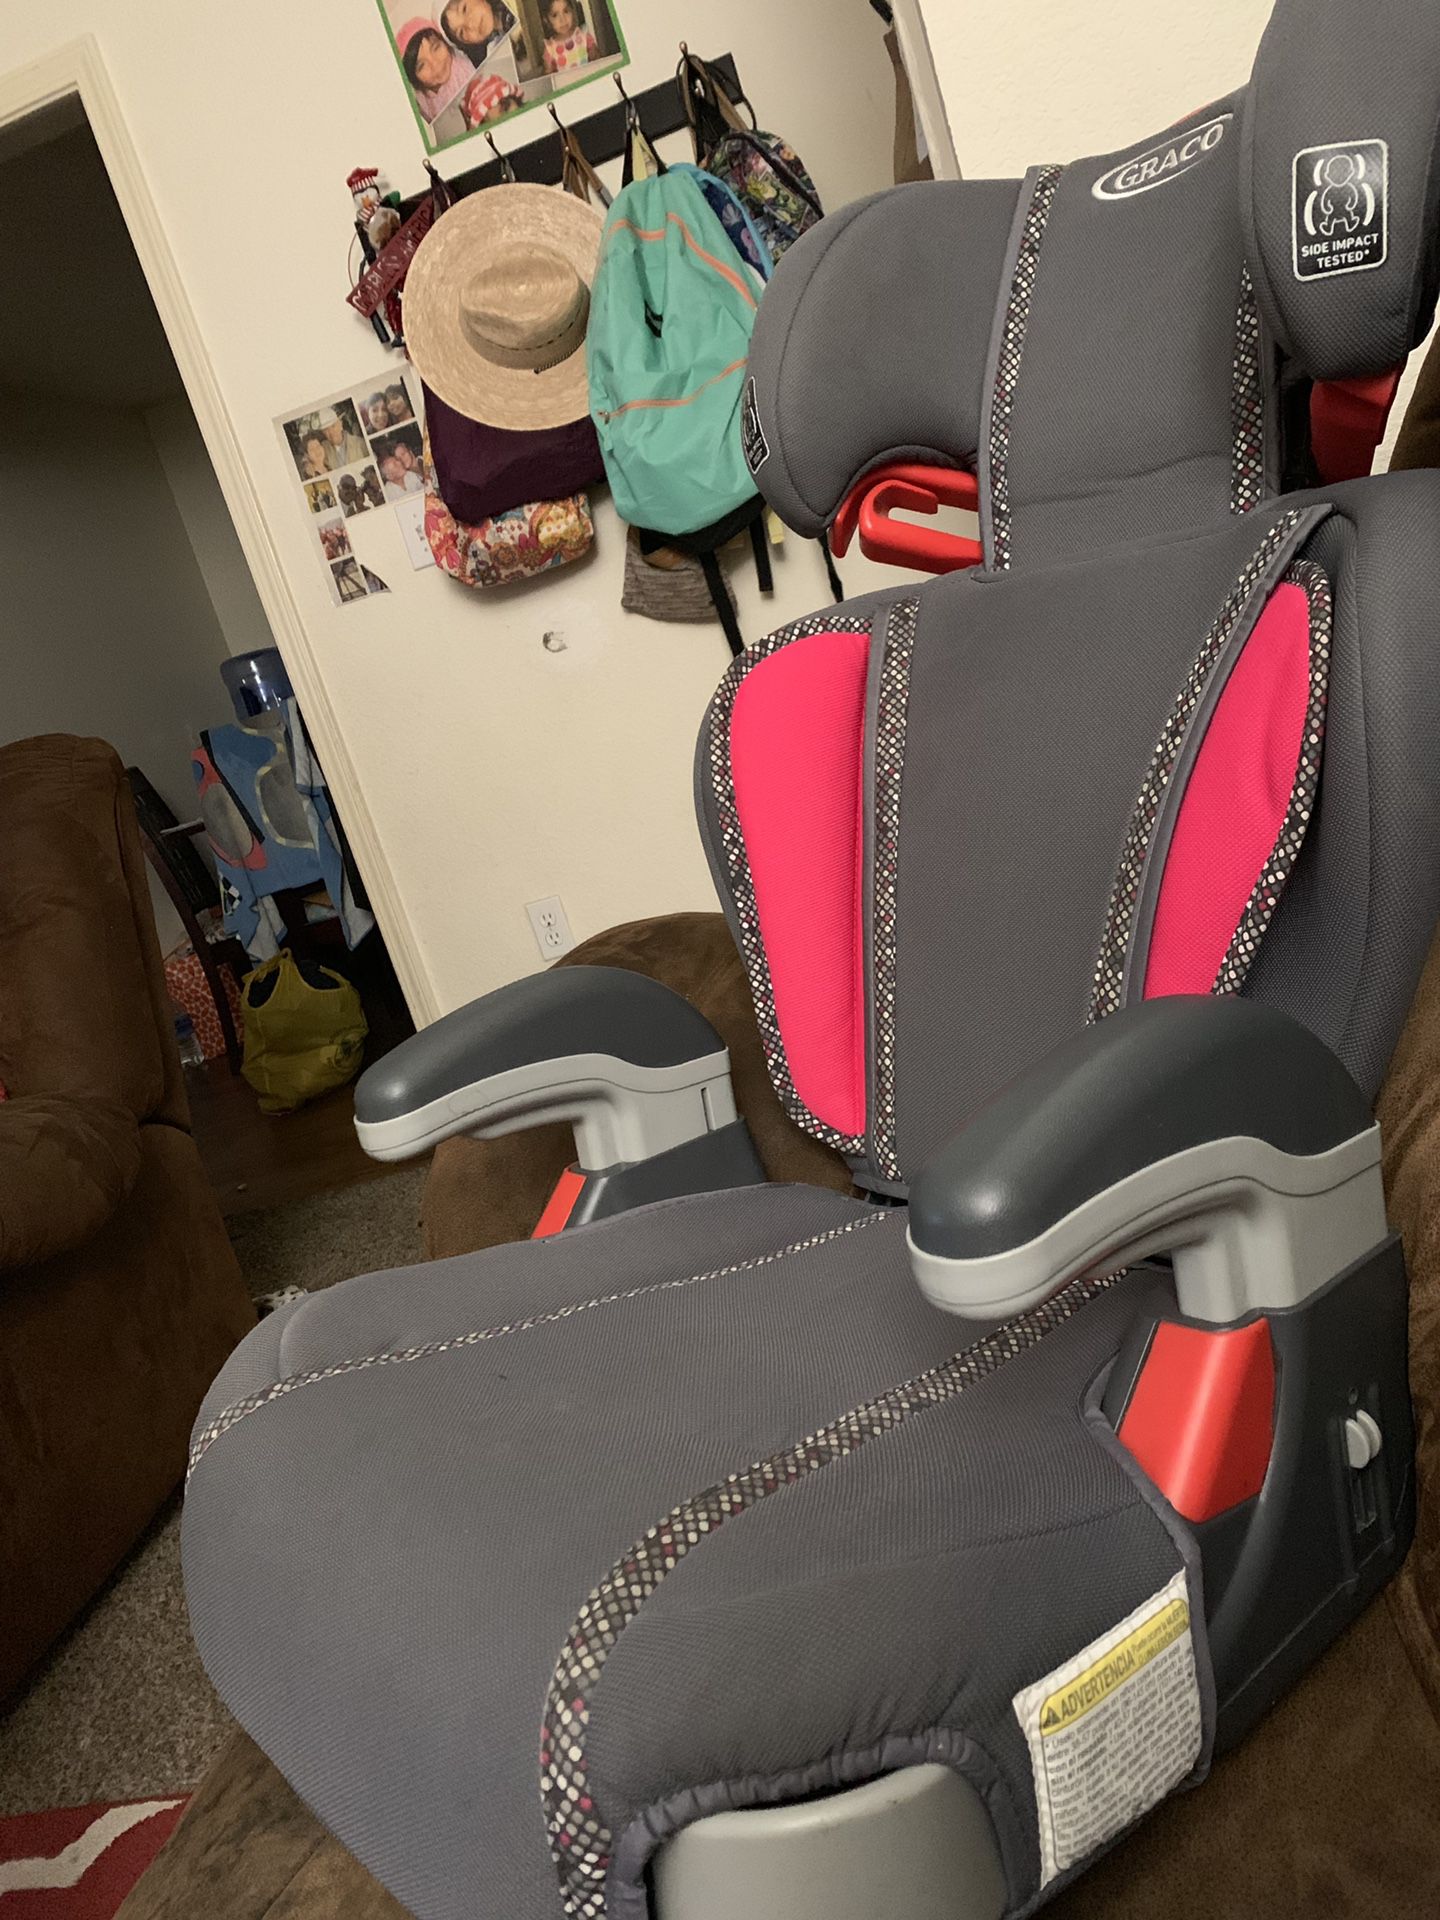 Graco booster/car seat